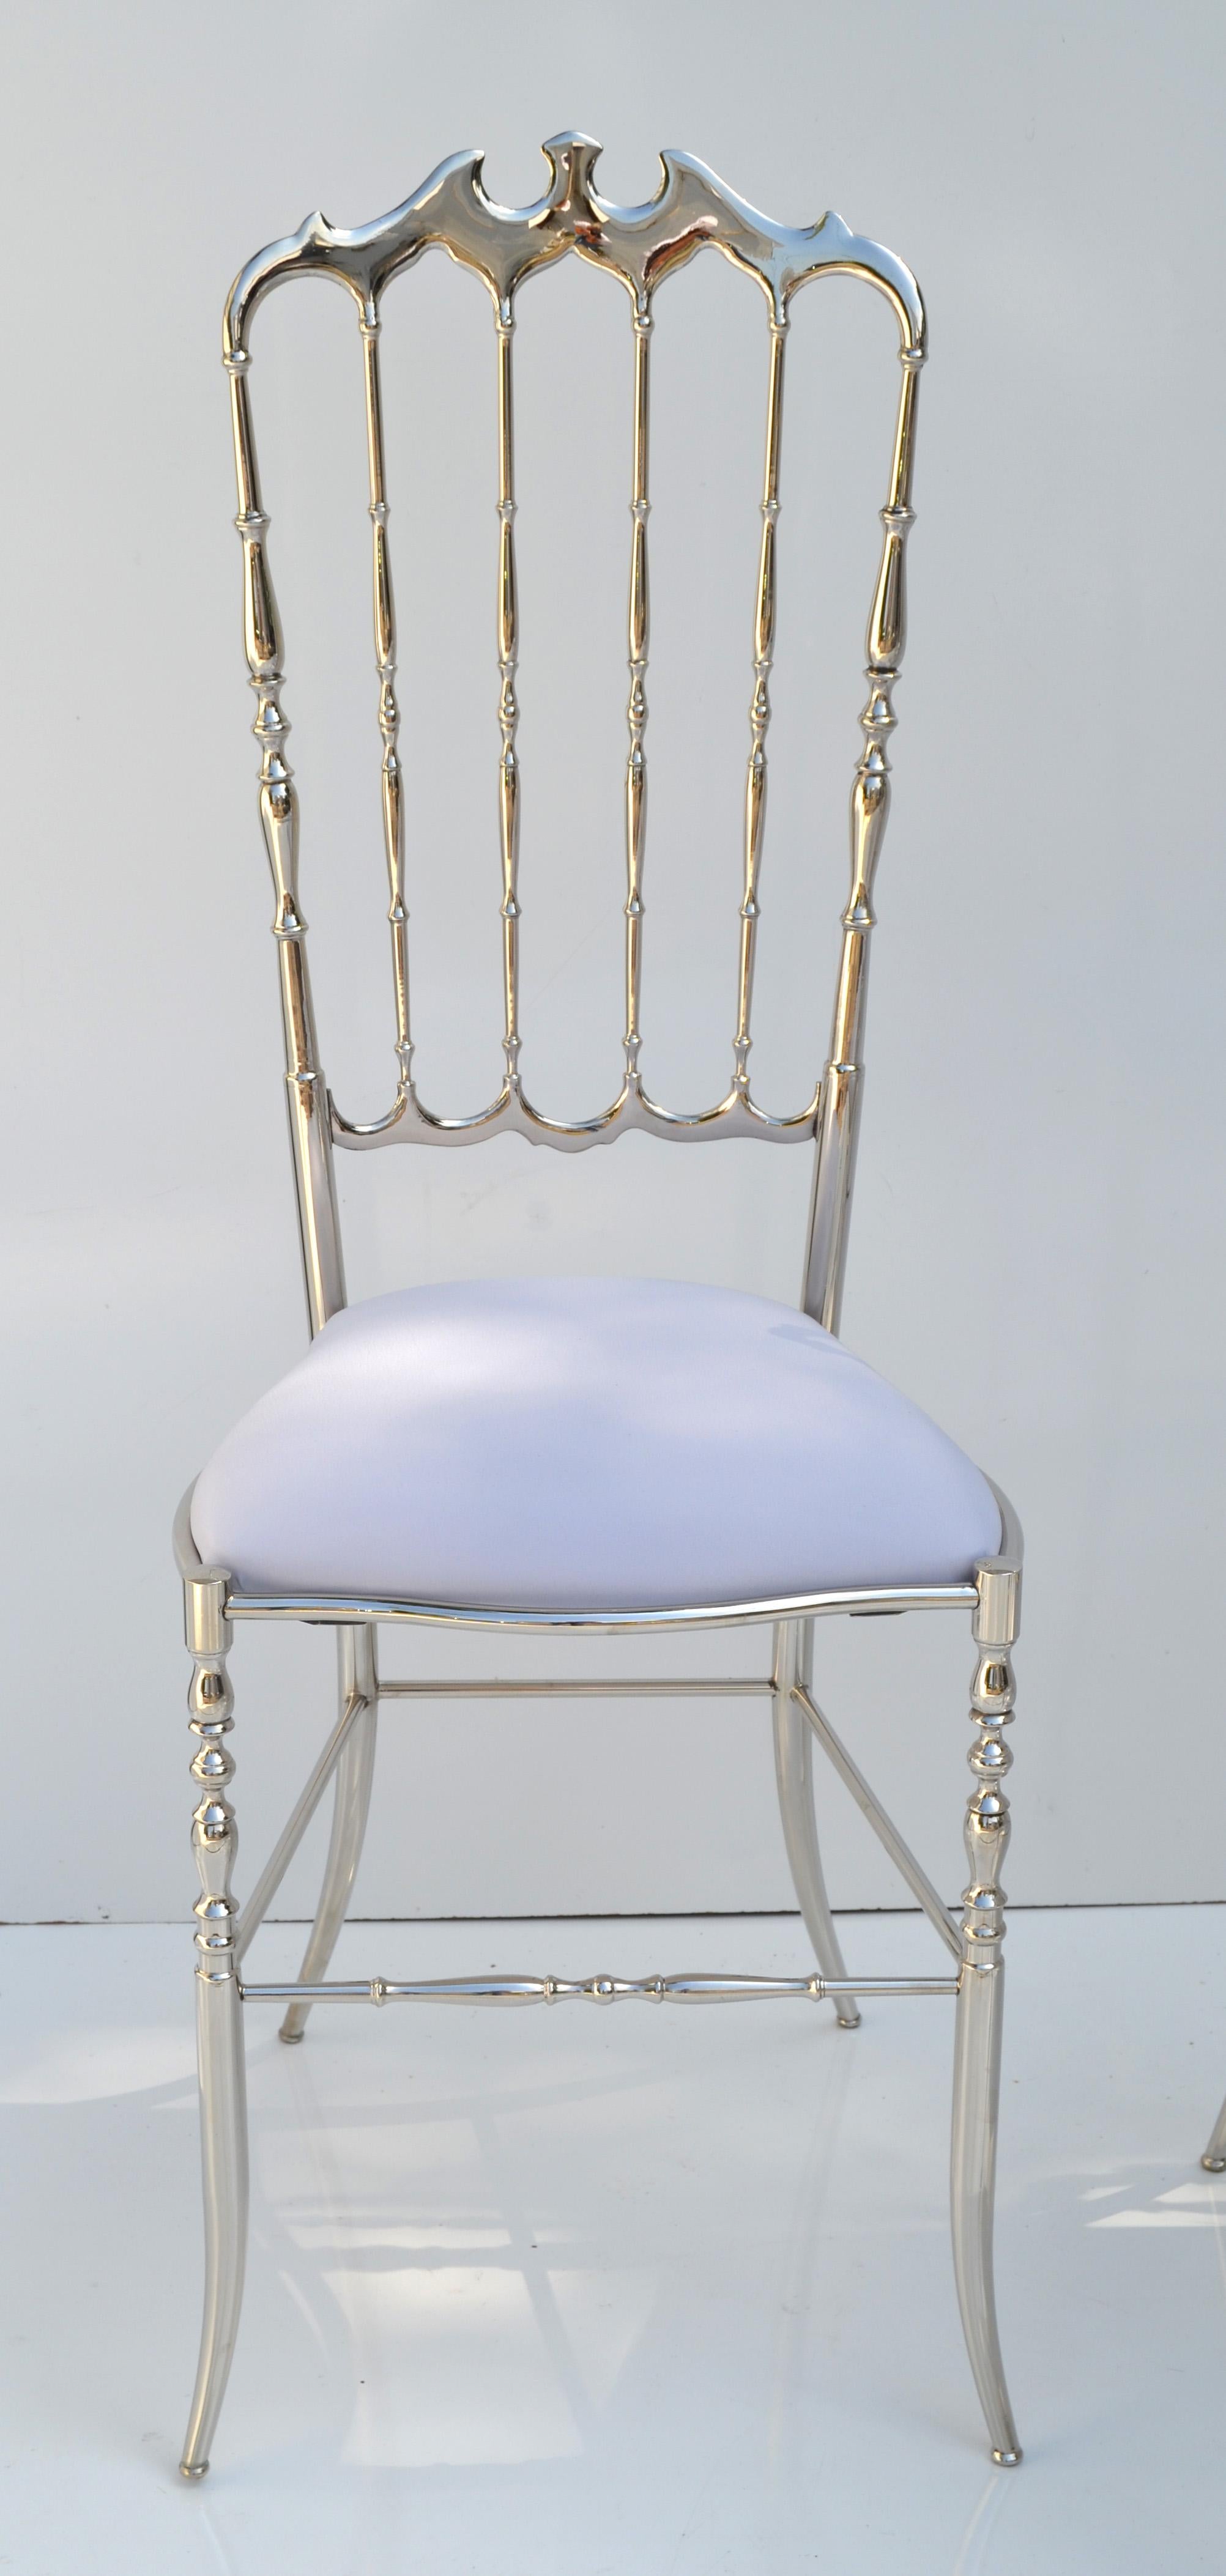 Maison Baccarat Crystal Room Restaurant Style Set of 6 Nickel Plated Chair 2